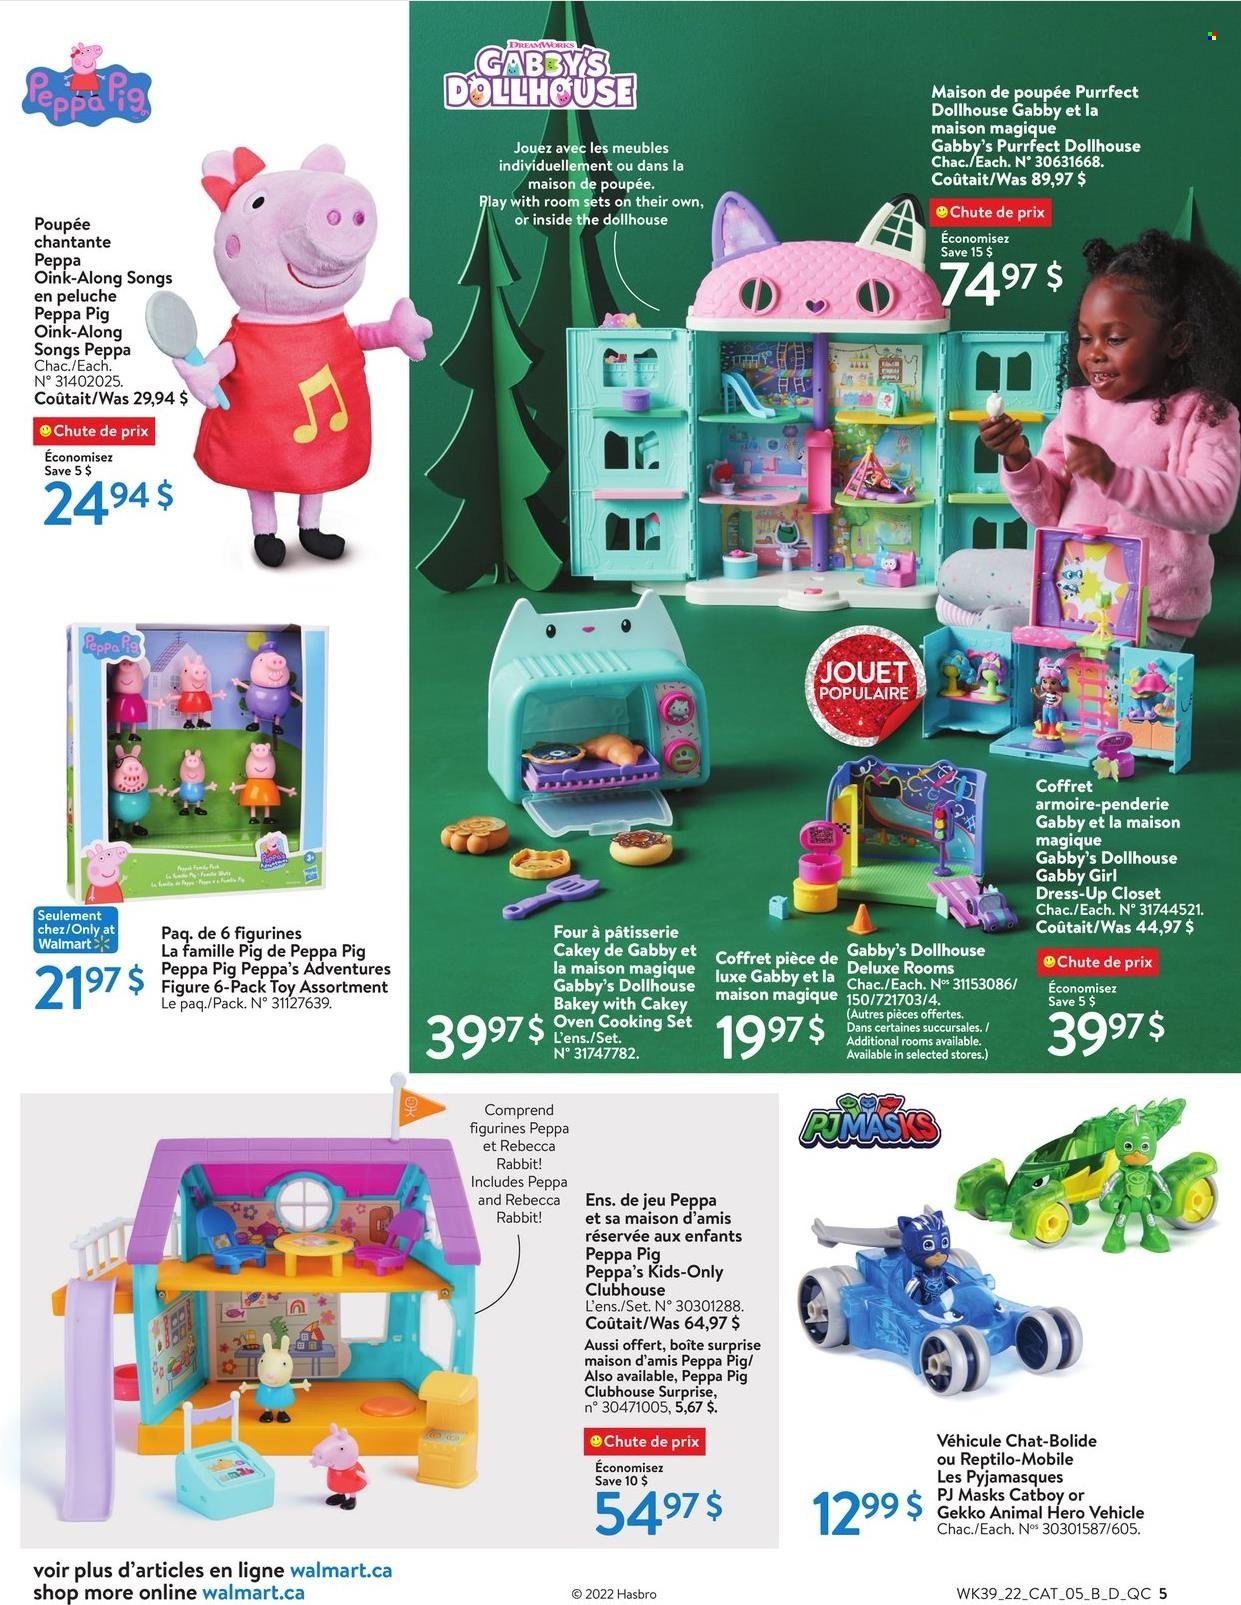 Walmart Flyer - October 20, 2022 - December 24, 2022 - Sales products - rabbit, Peppa Gris, cookware set, oven, closet system, dress, Hasbro, toys, vehicle. Page 5.